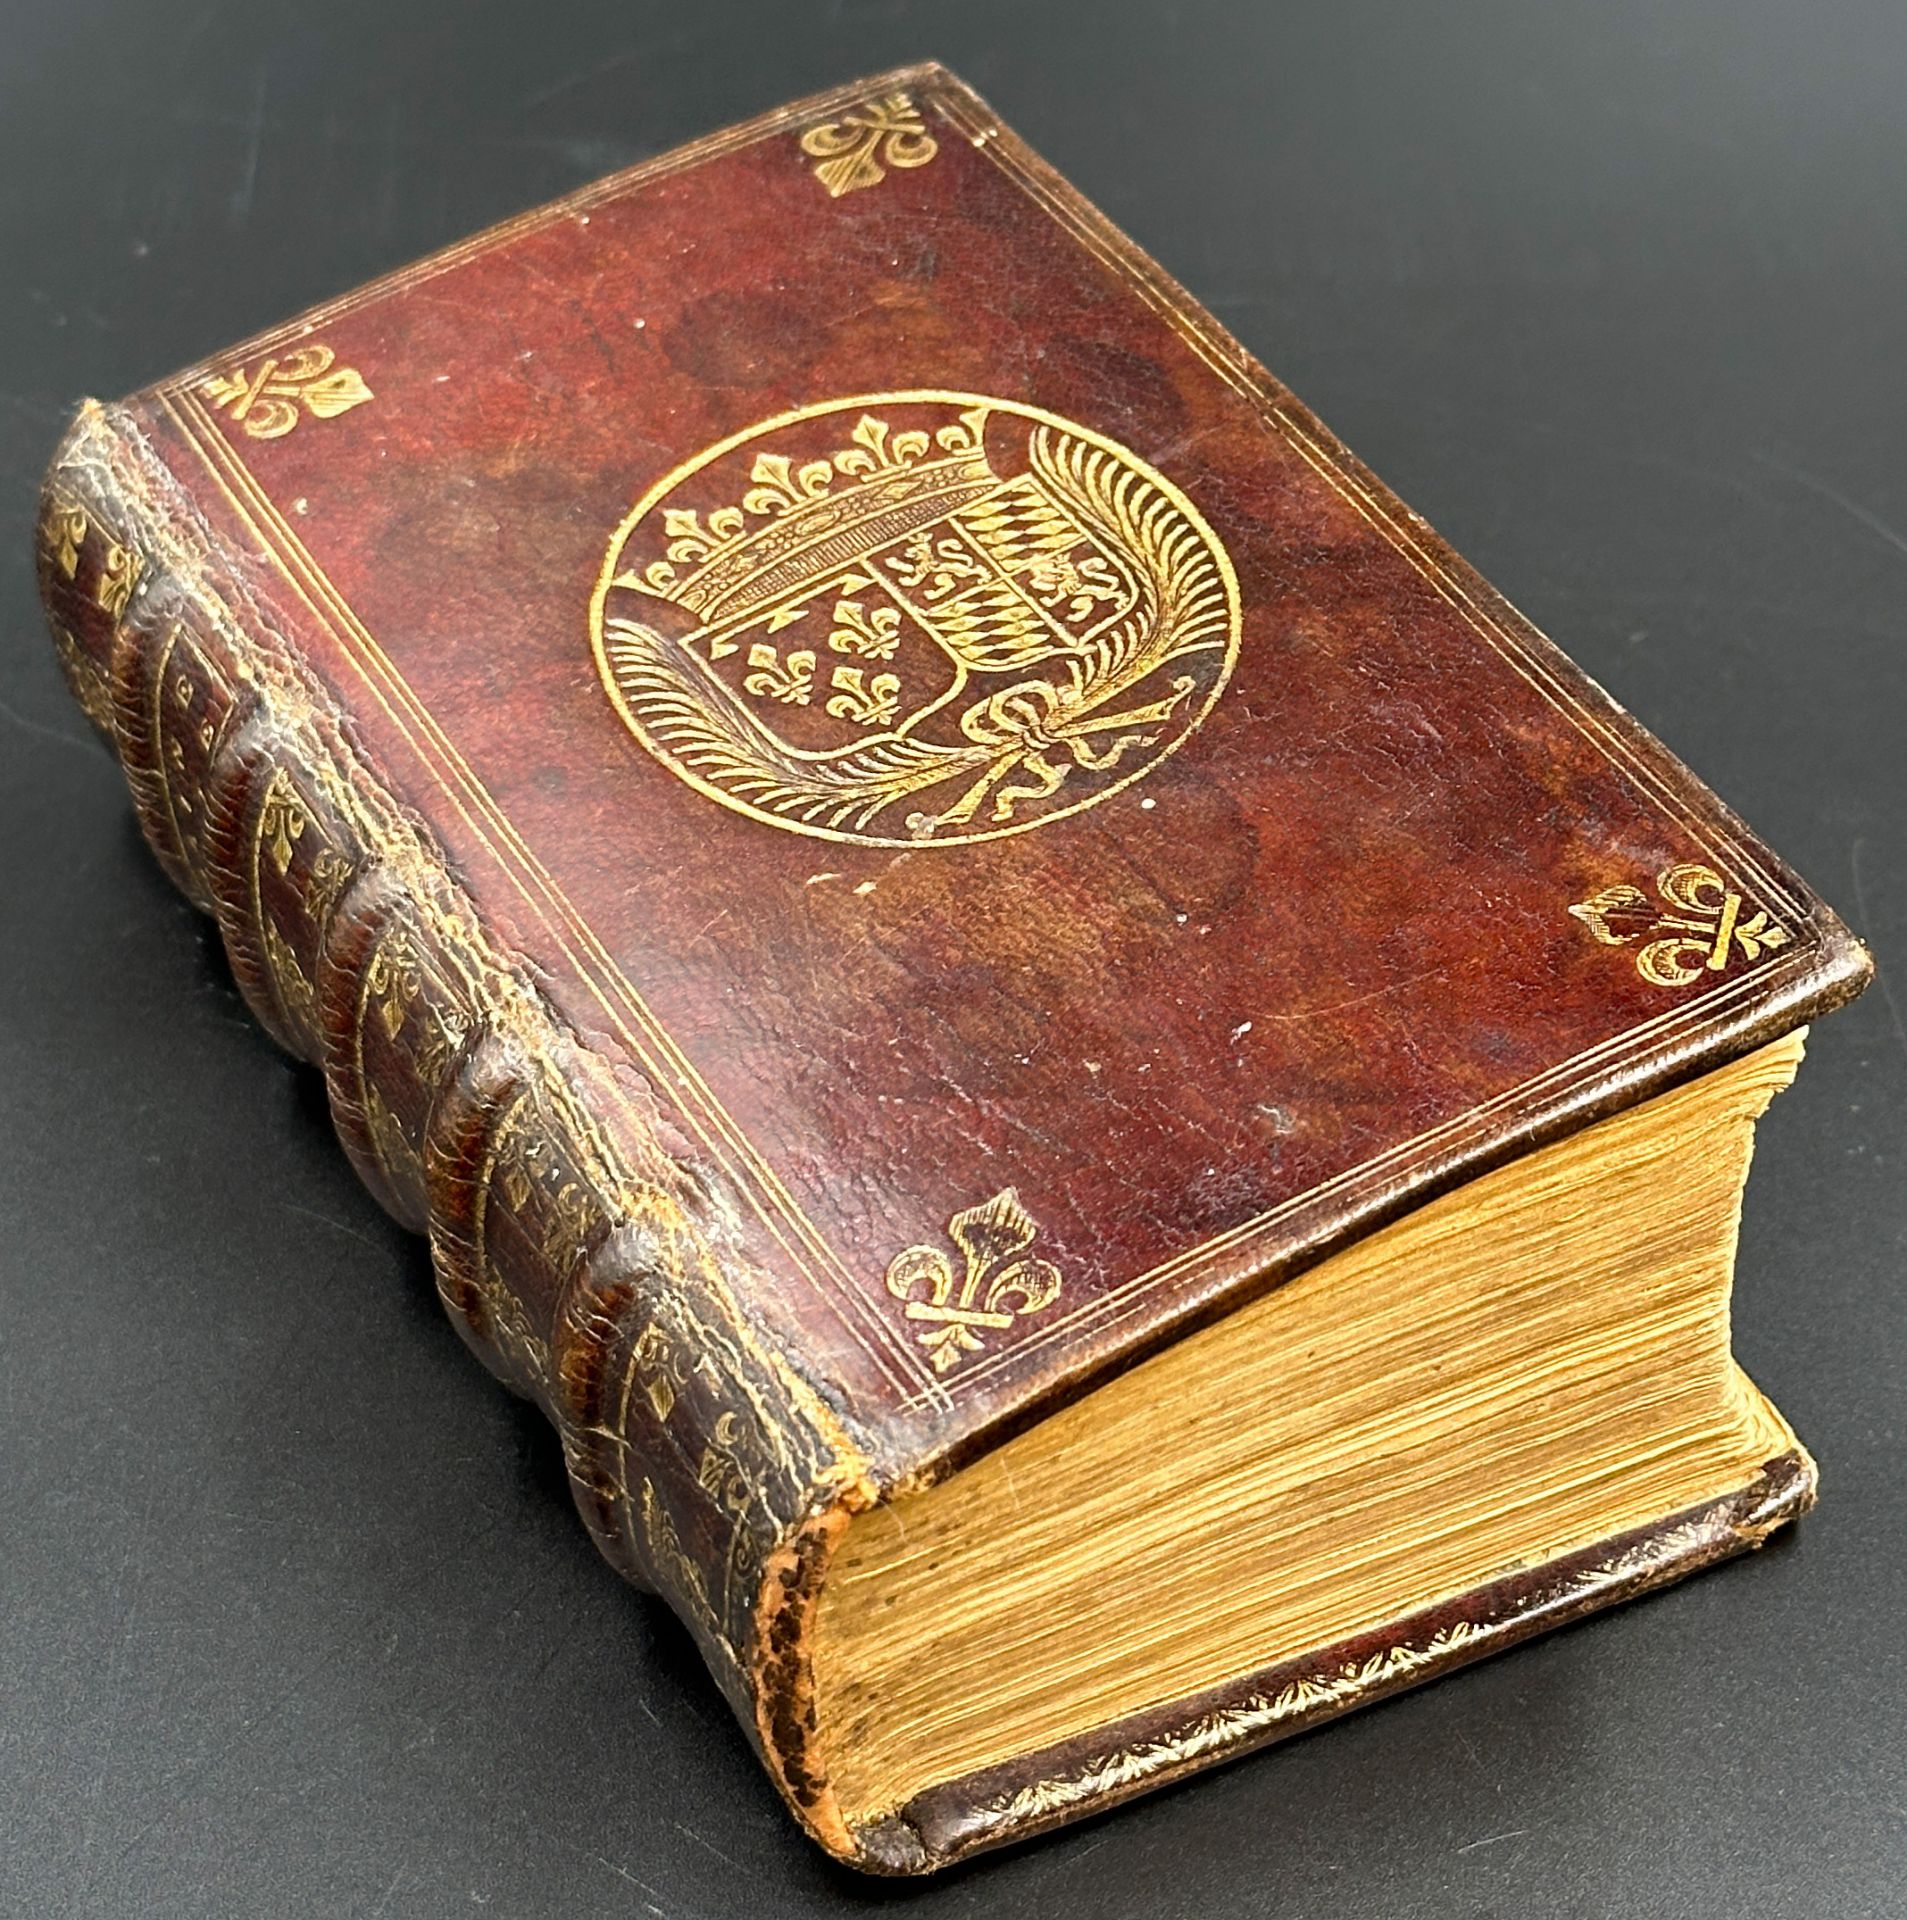 Prayer book. Probably from the household of Liselotte of the Palatinate. 1692.